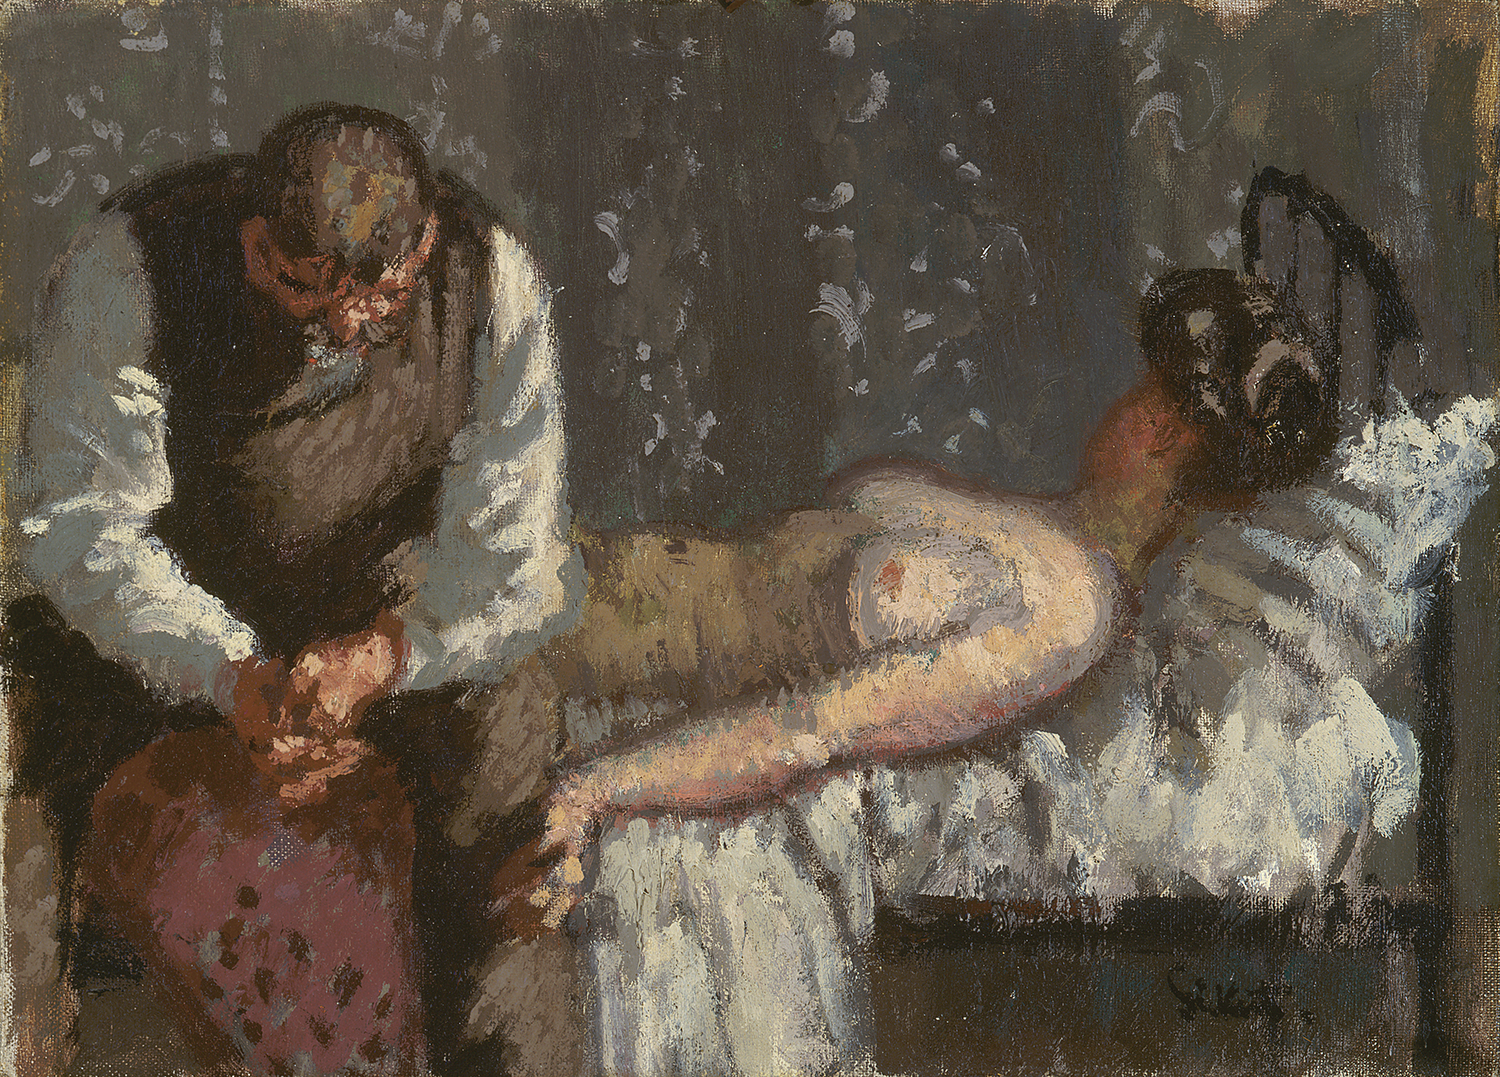 Walter Richard Sickert, The Camden Town Murder or What Shall We Do for the Rent?, c. 1908. Yale Center for British Art, New Haven